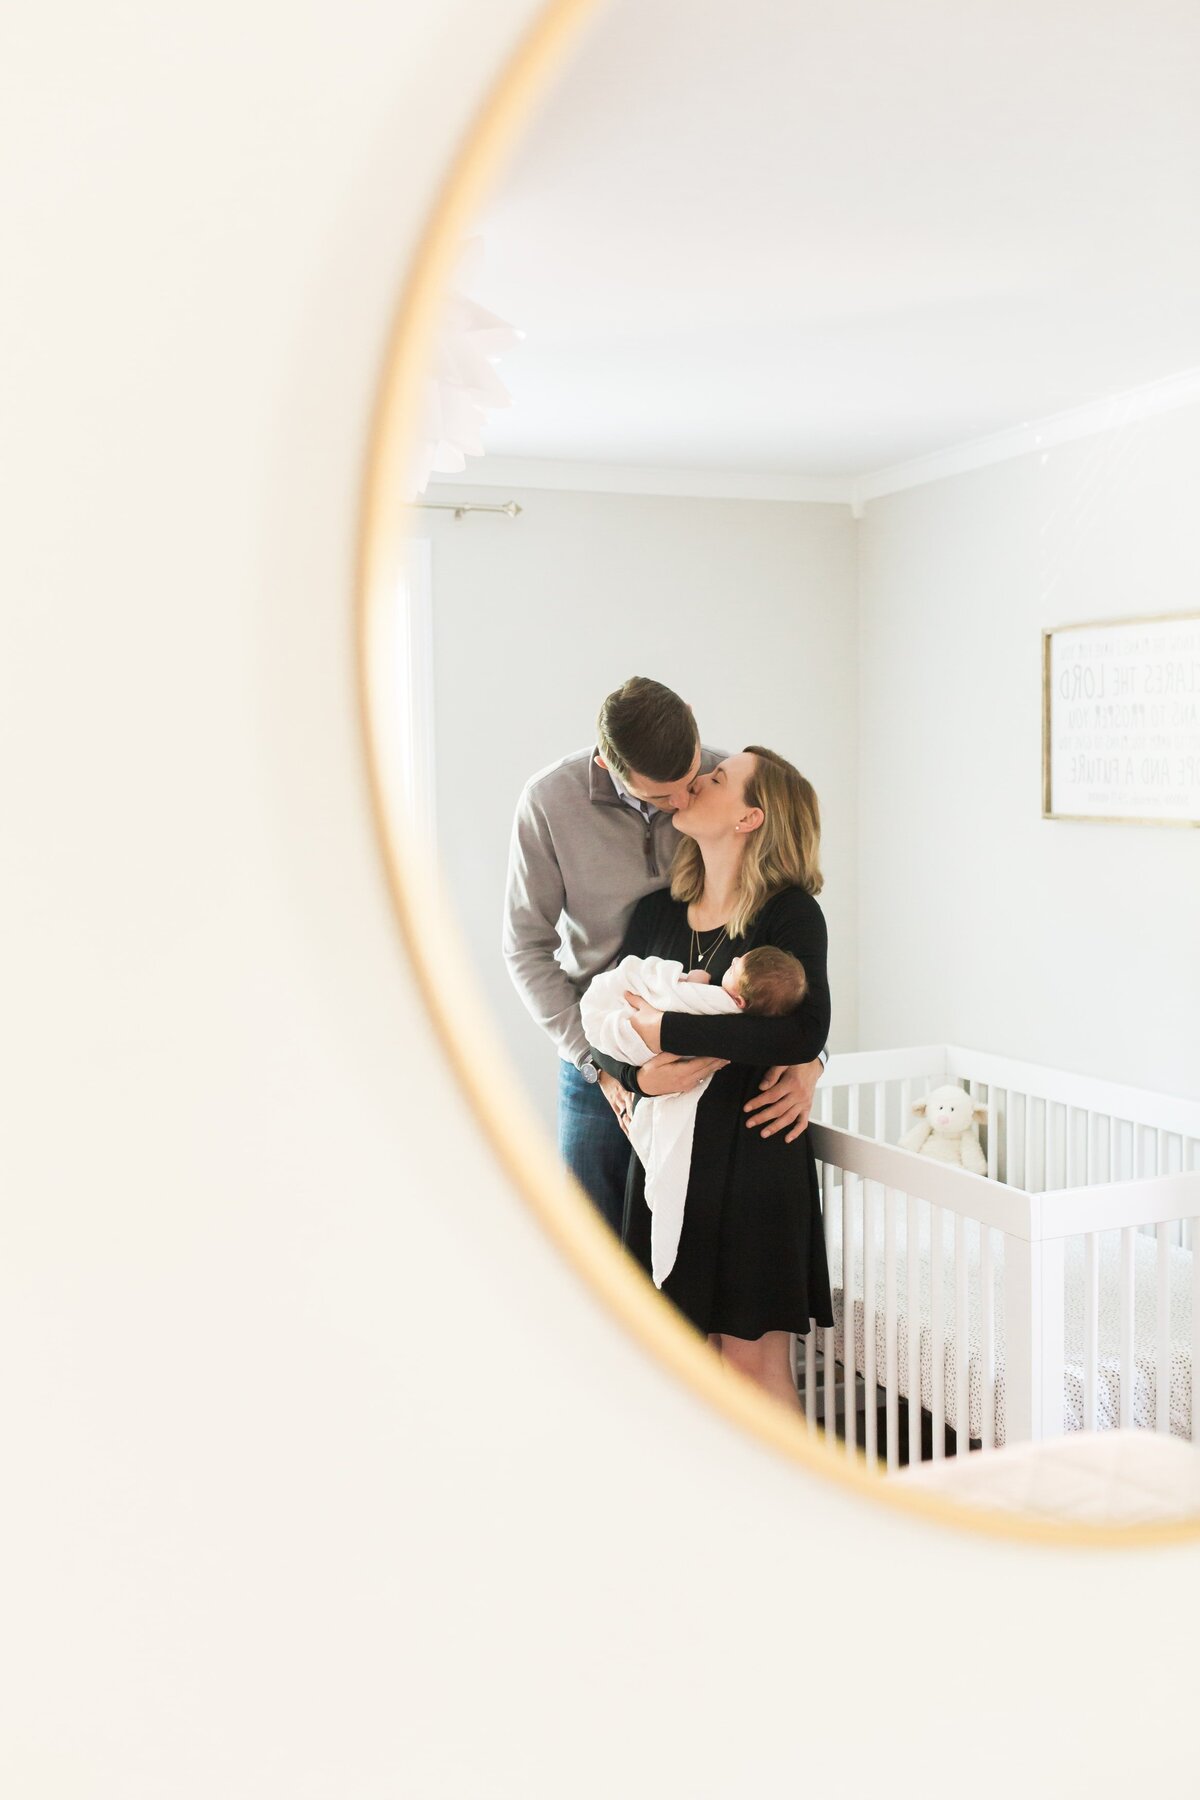 Two adults sharing a kiss while holding a baby in a nursery, as seen through a circular mirror, captured by an at-home newborn photography session.